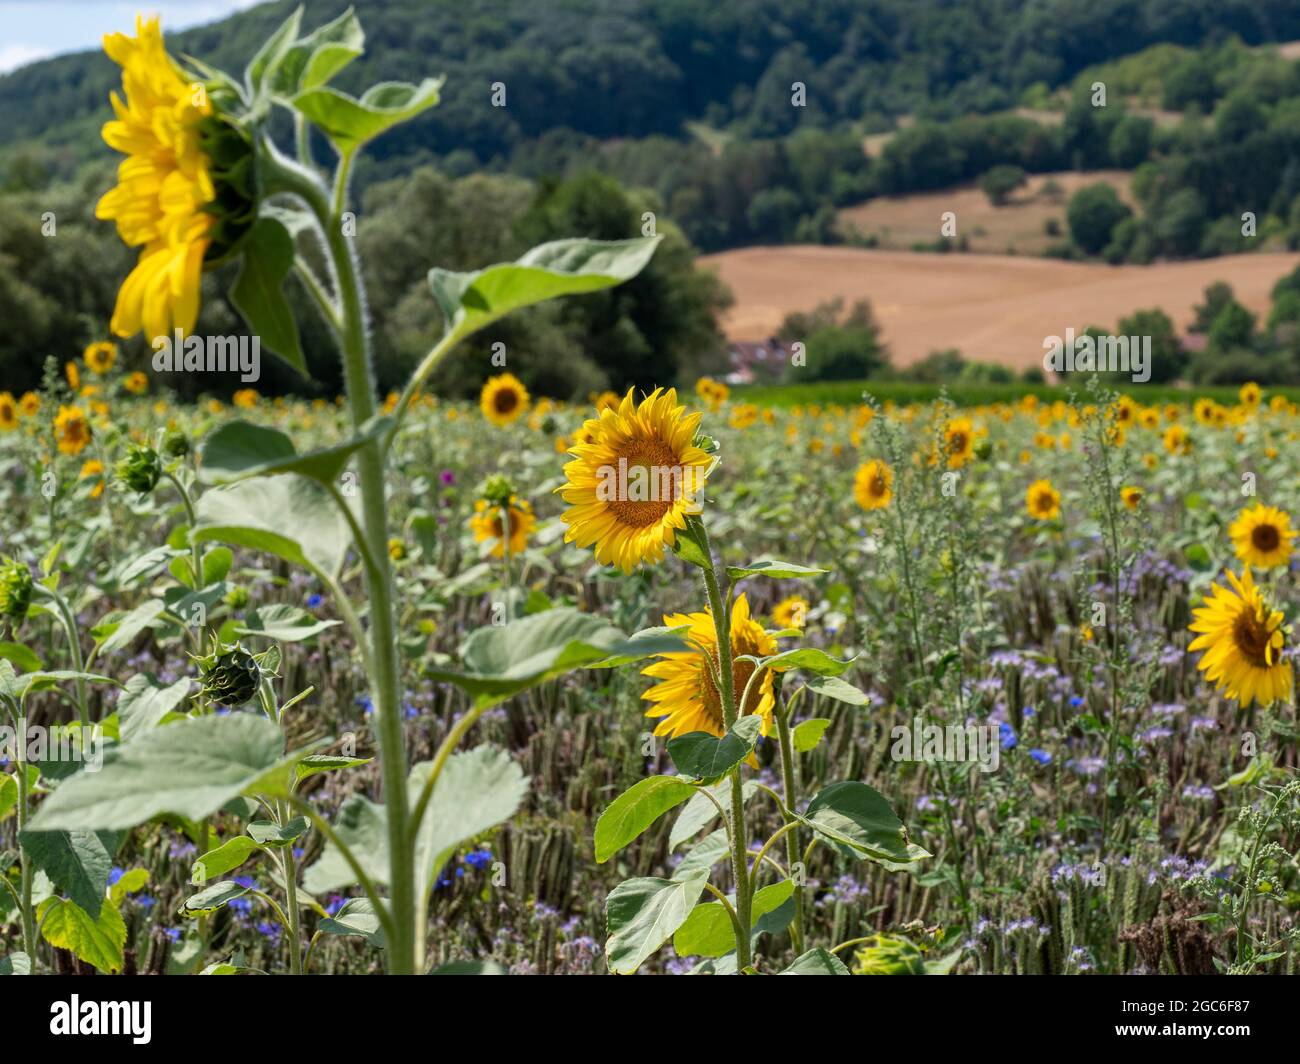 Sunflower field in front of a wooded mountain with selective focus on one flower in the foreground Stock Photo